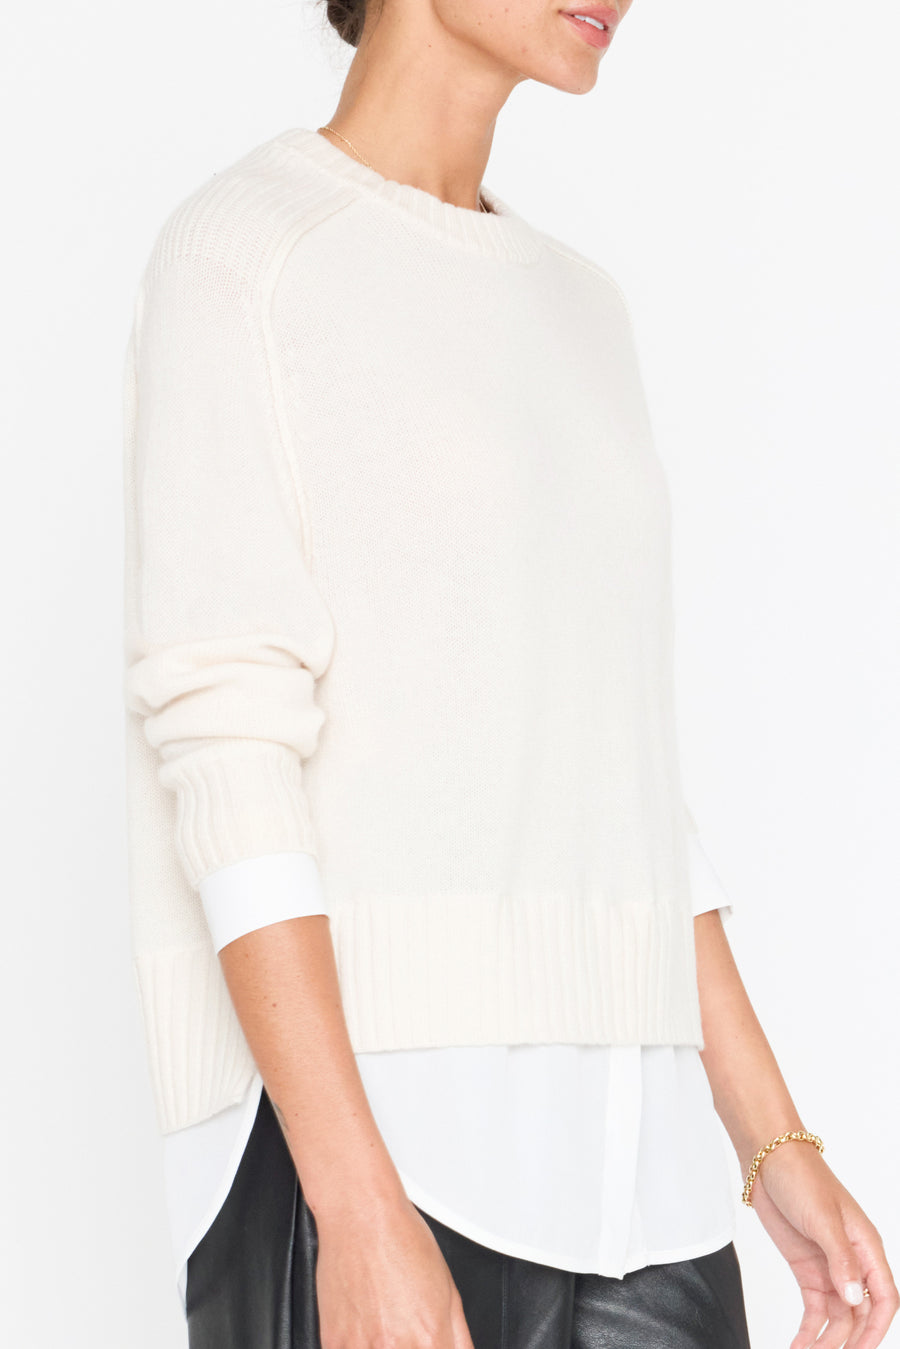 Parson cashmere-wool layered crewneck white sweater side view